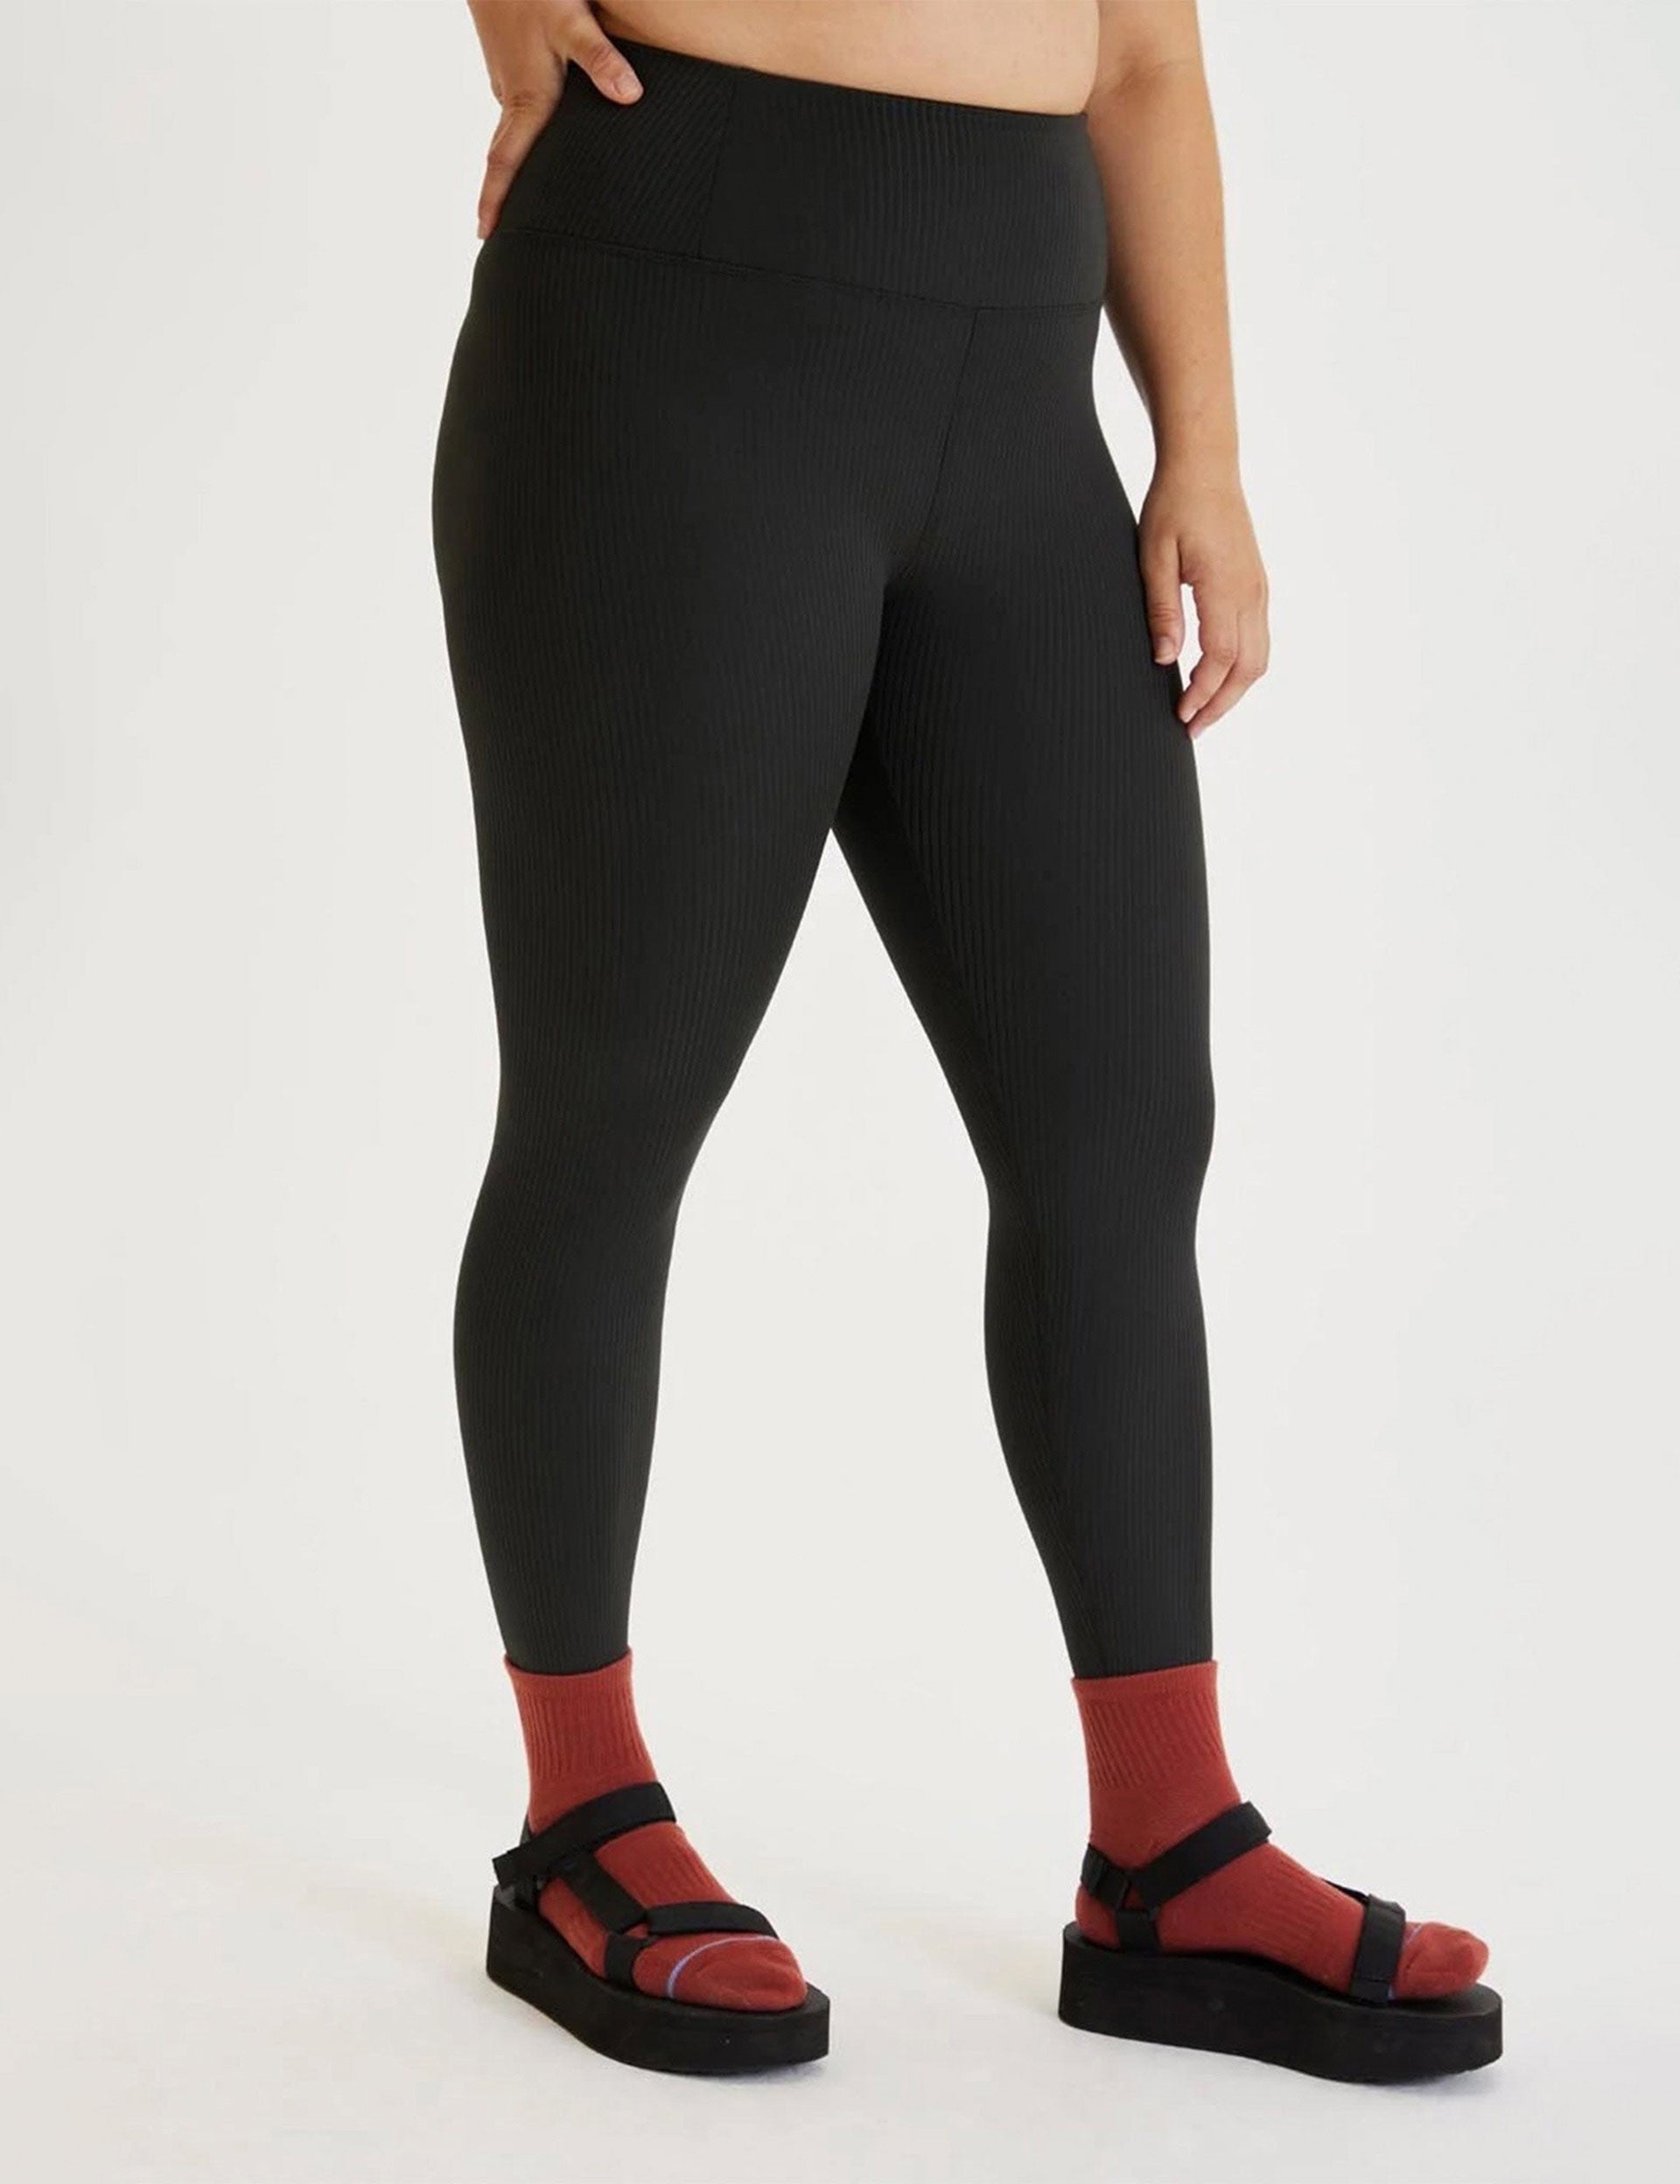 Buy SPANX® Eco Care Black High Waisted Seamless Leggings from Next Hungary